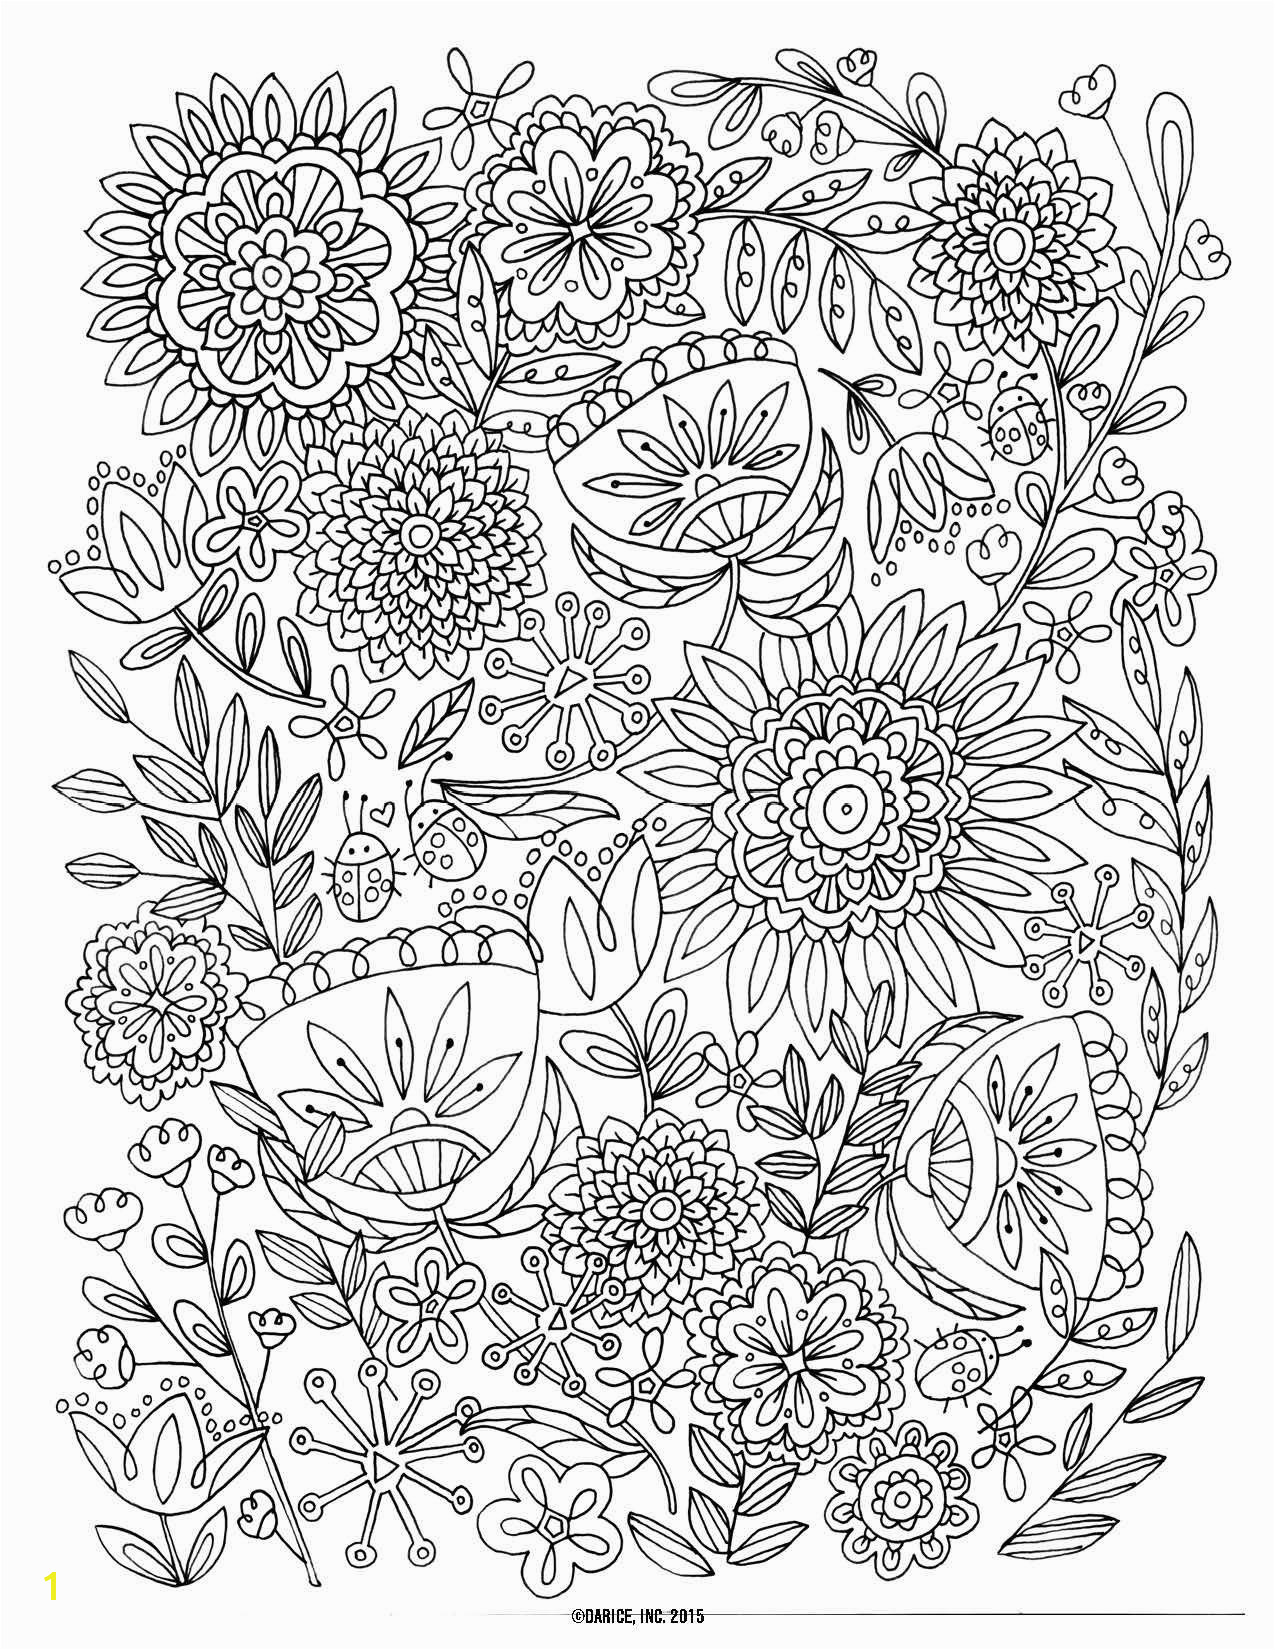 I have a SUPER fun Activity to do with these free coloring pages